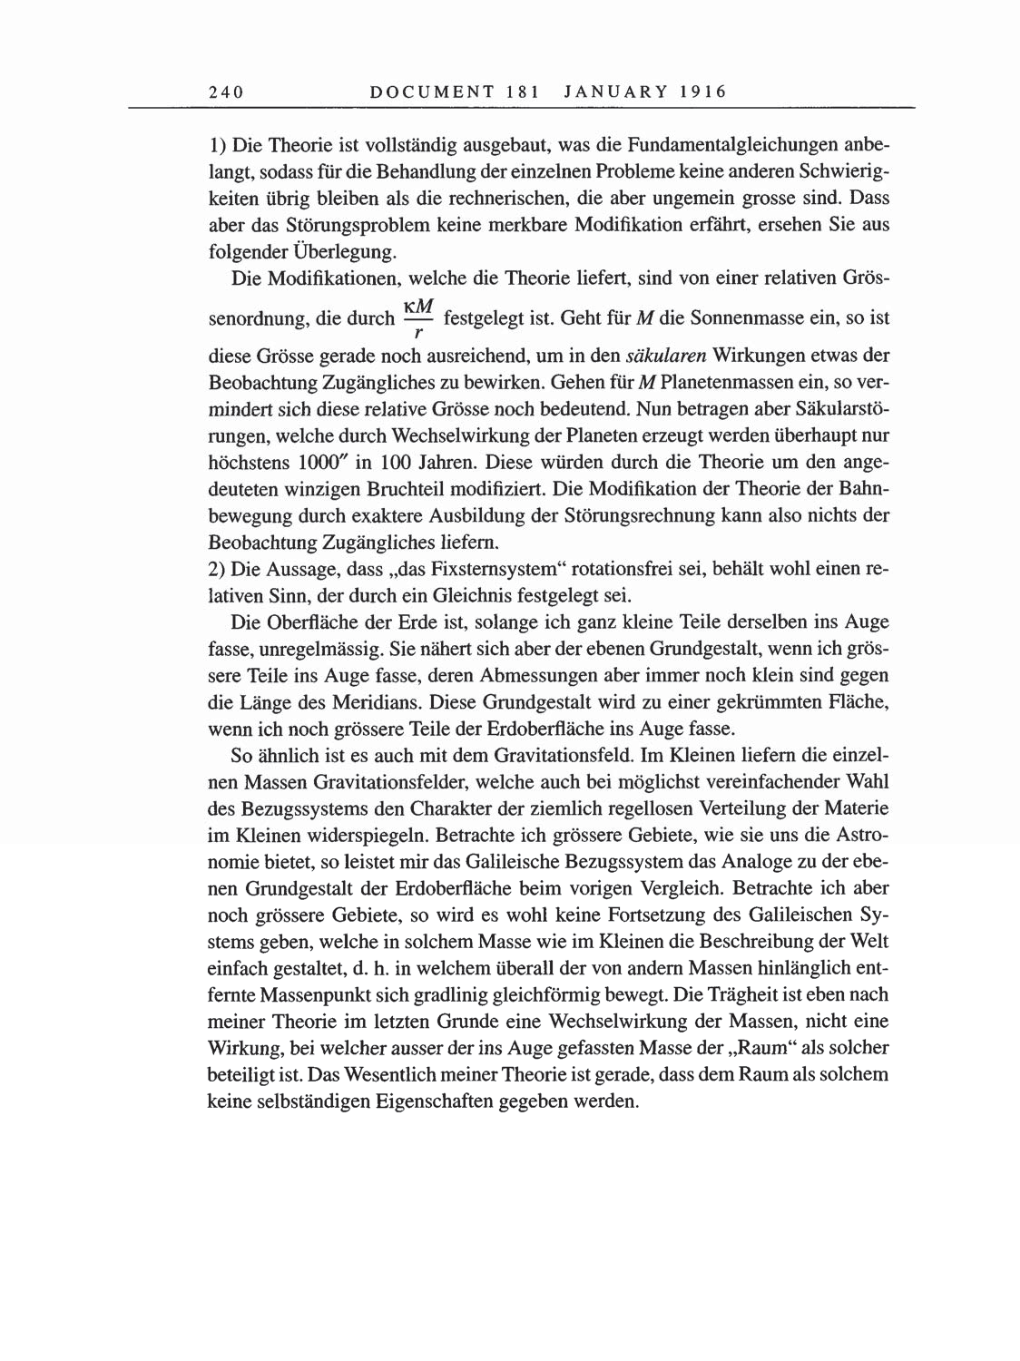 Volume 8, Part A: The Berlin Years: Correspondence 1914-1917 page 240